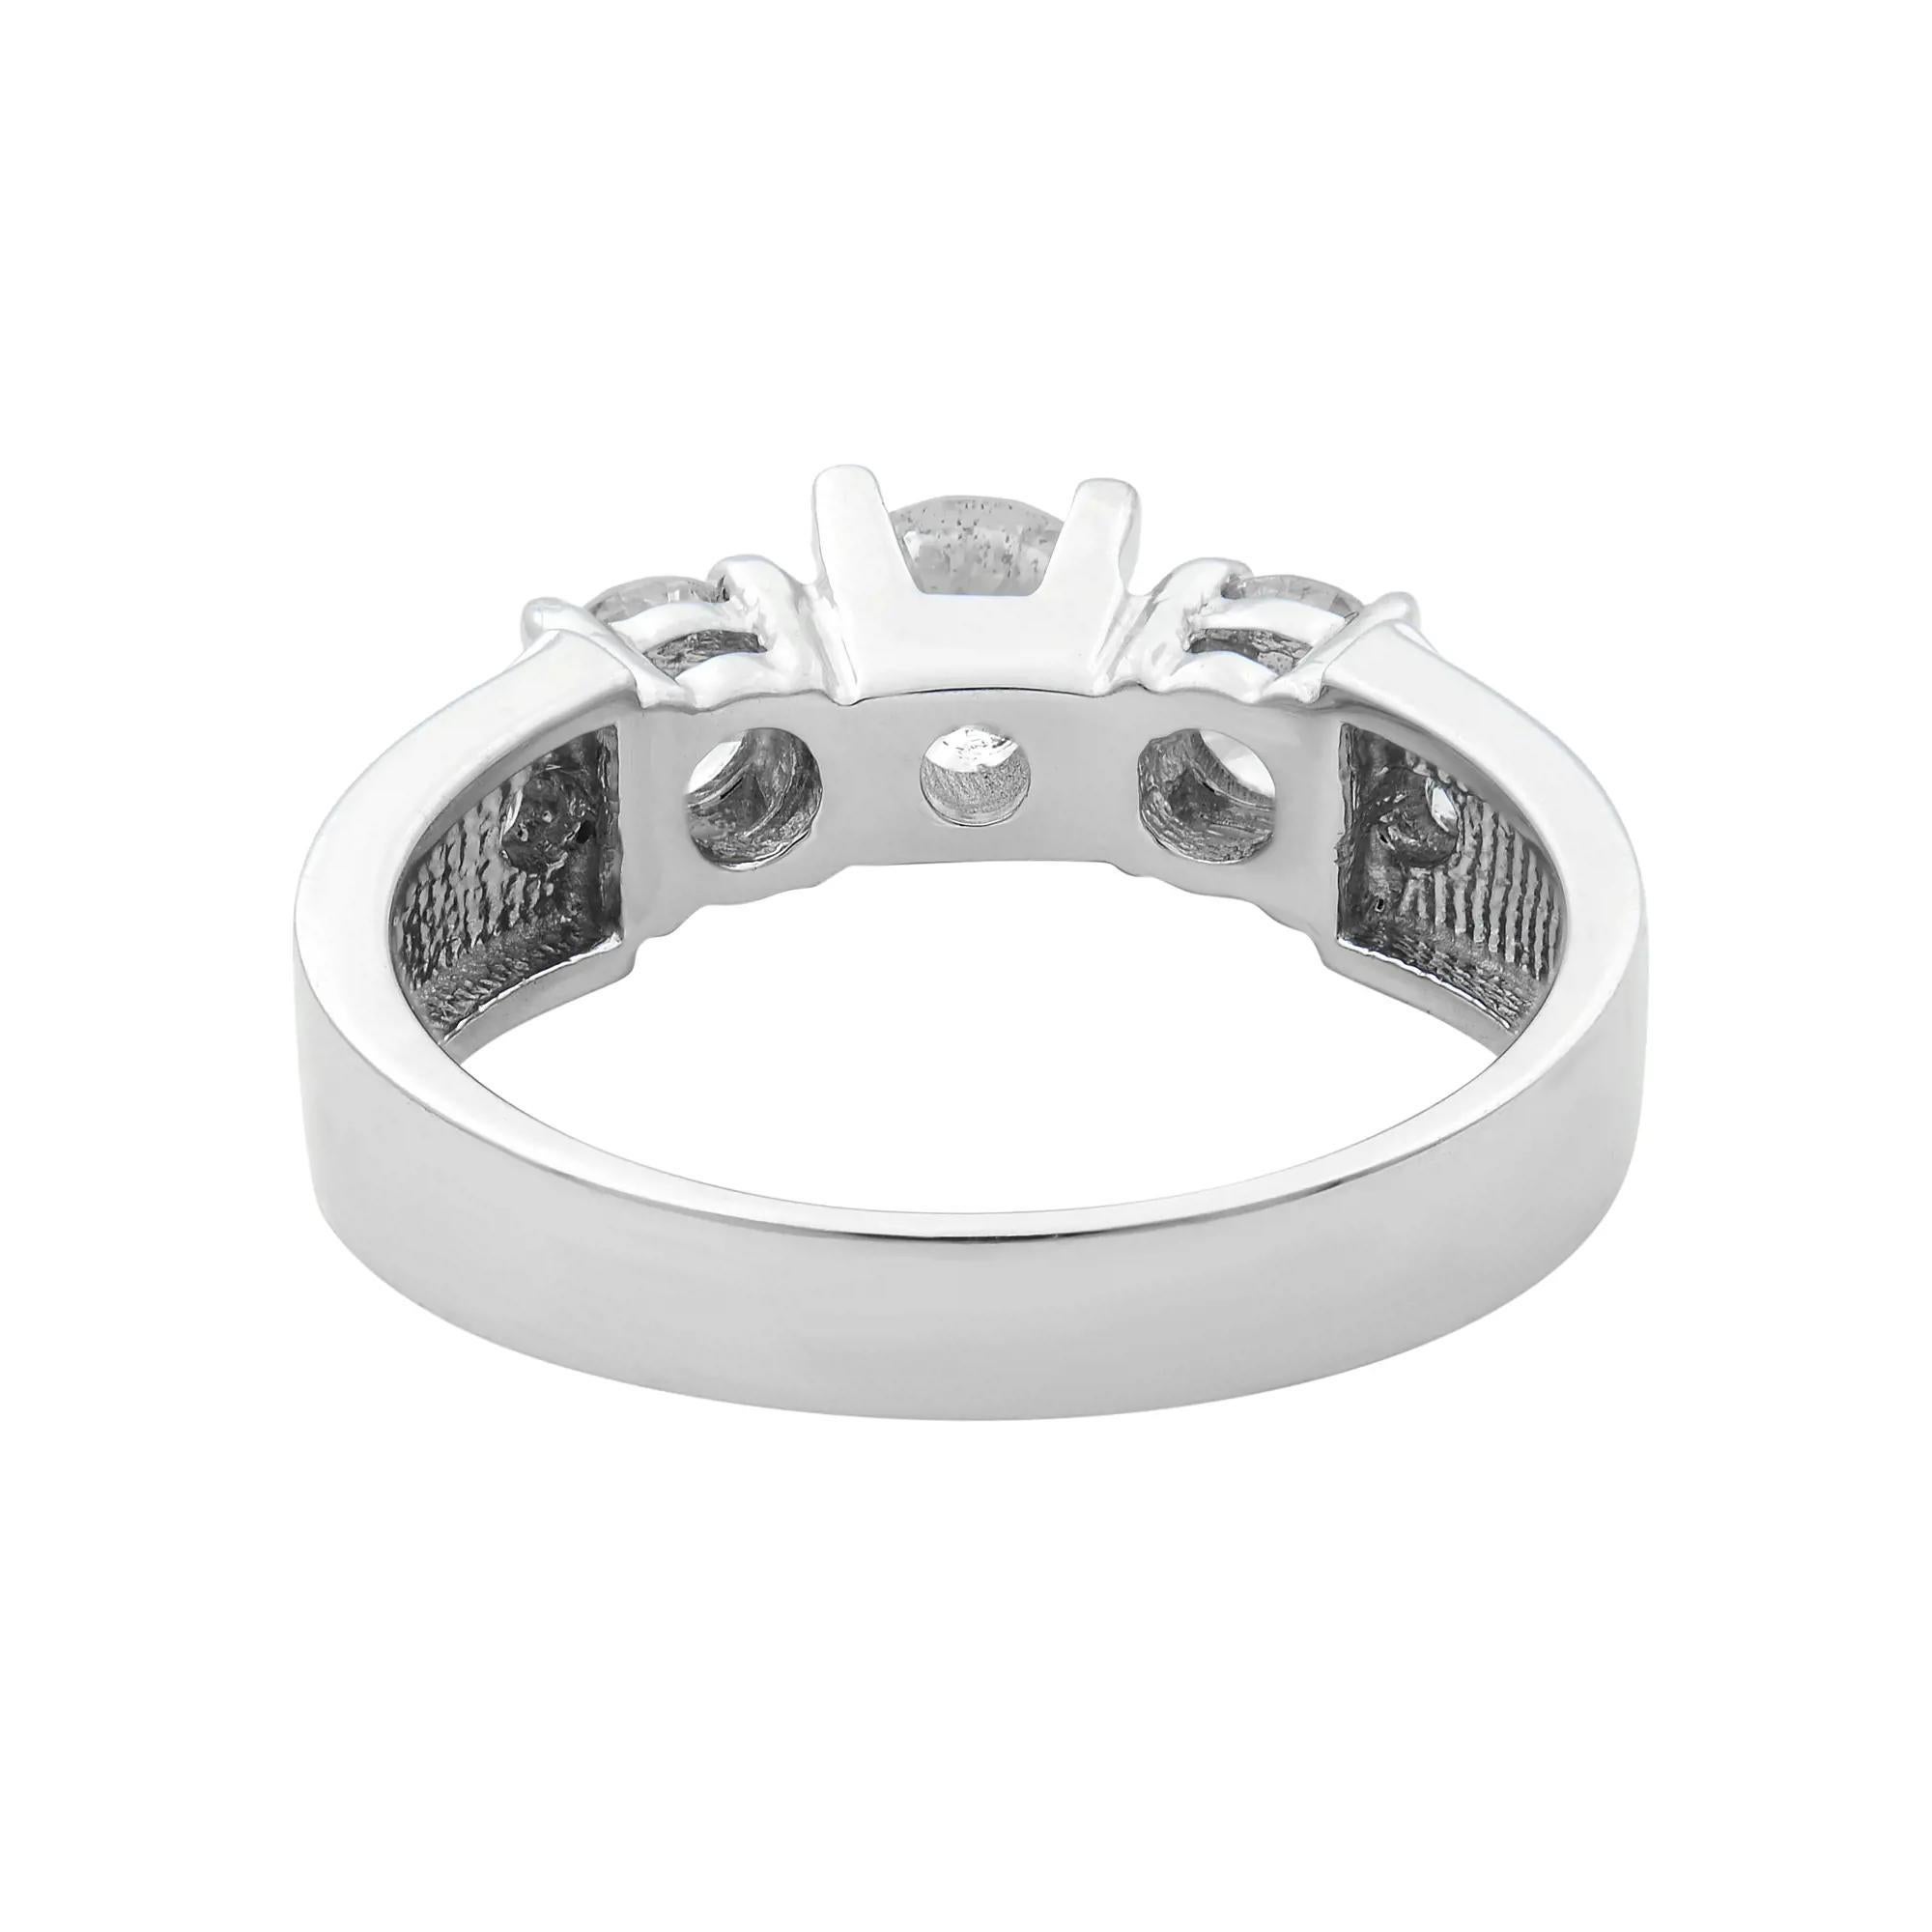 Round Cut 0.75Cttw Round & Baguette Cut Diamond Wedding Band Ring 14K White Gold Size 7 For Sale